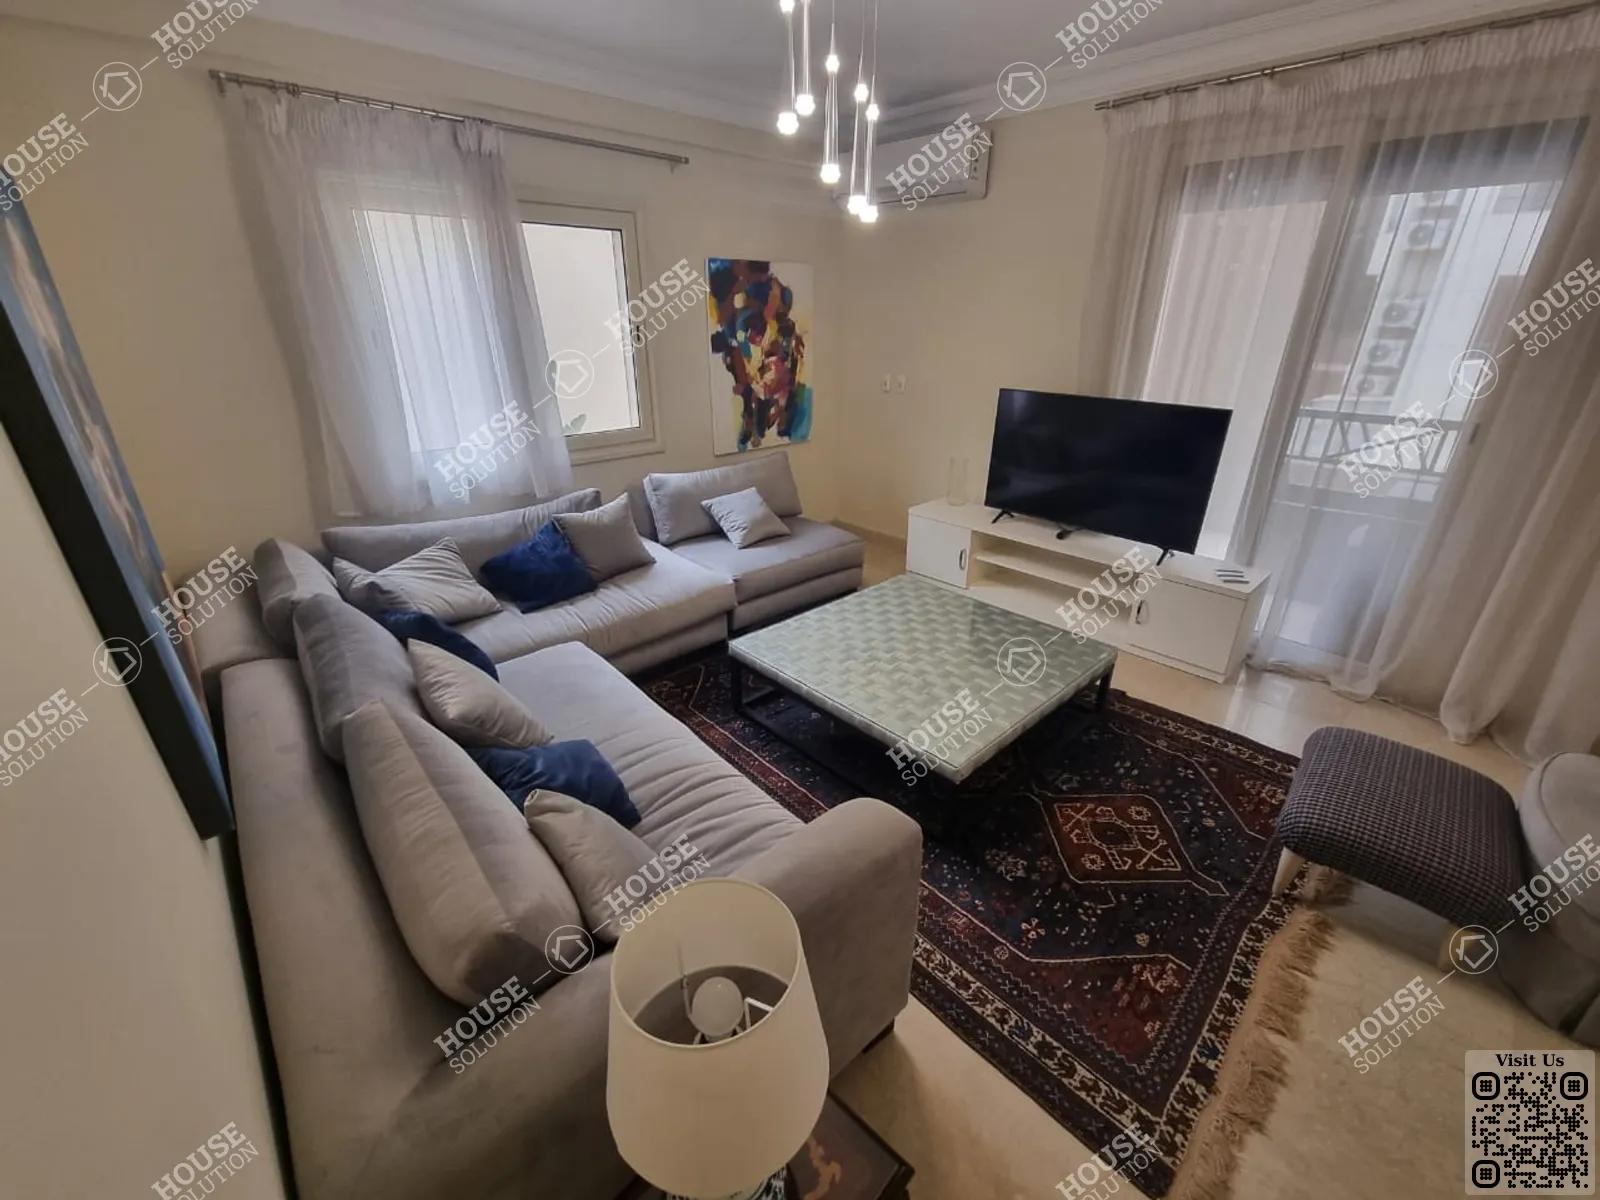 RECEPTION  @ Apartments For Rent In Maadi Maadi Sarayat Area: 200 m² consists of 3 Bedrooms 3 Bathrooms Modern furnished 4 stars #5170-2